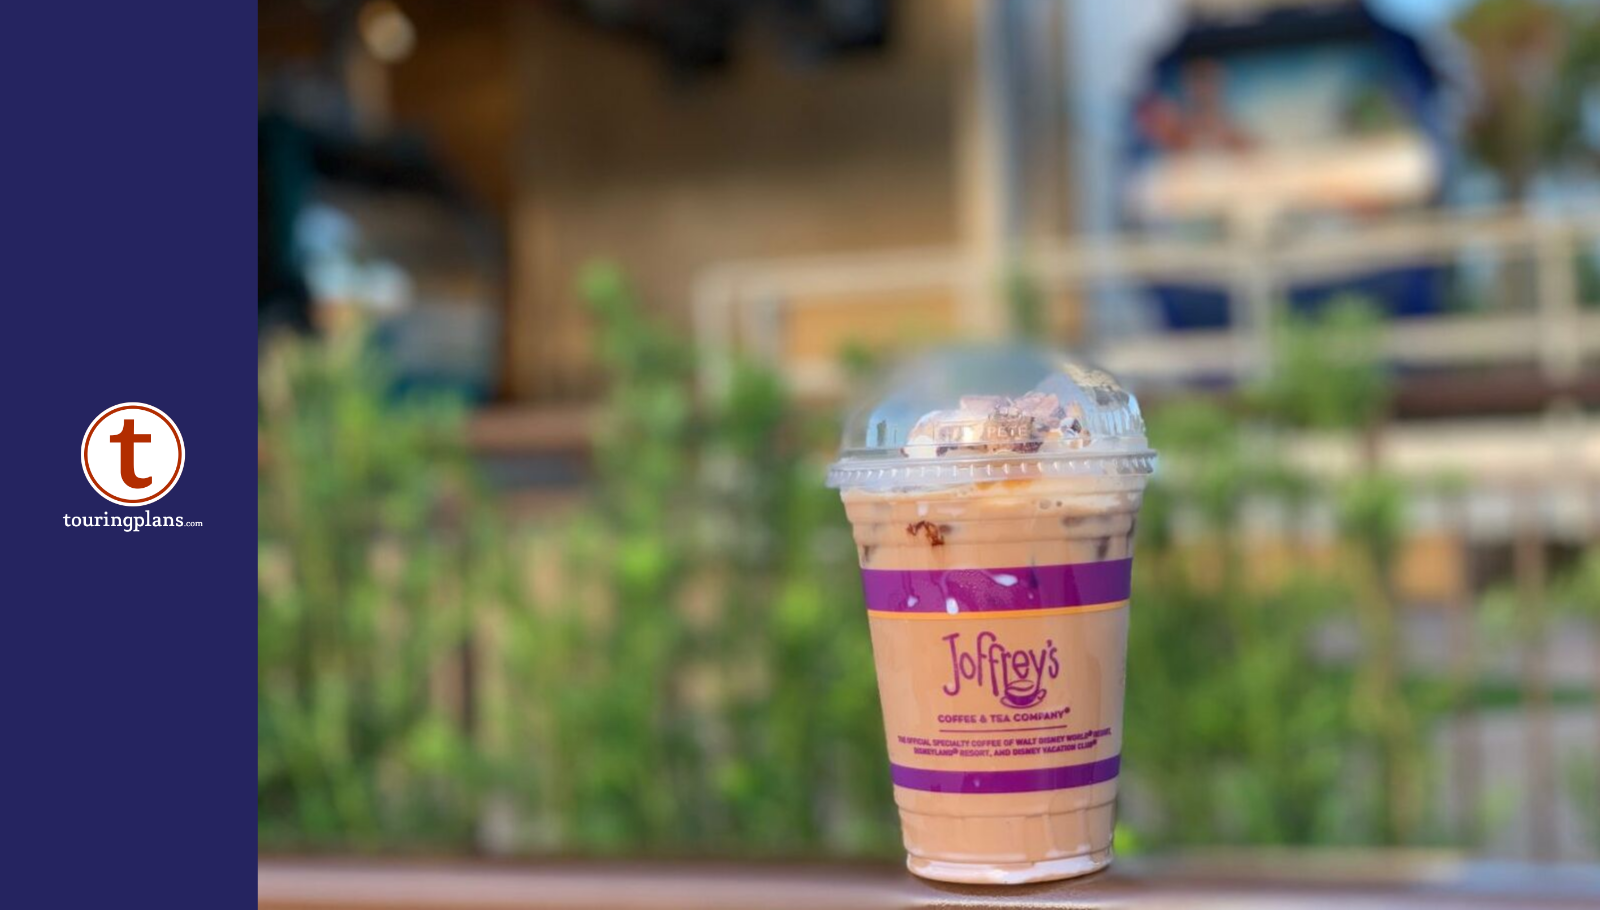 Joffrey's Coffee isn't waiting for the seasons to change; they're  celebrating Spring now! - Disney Dining